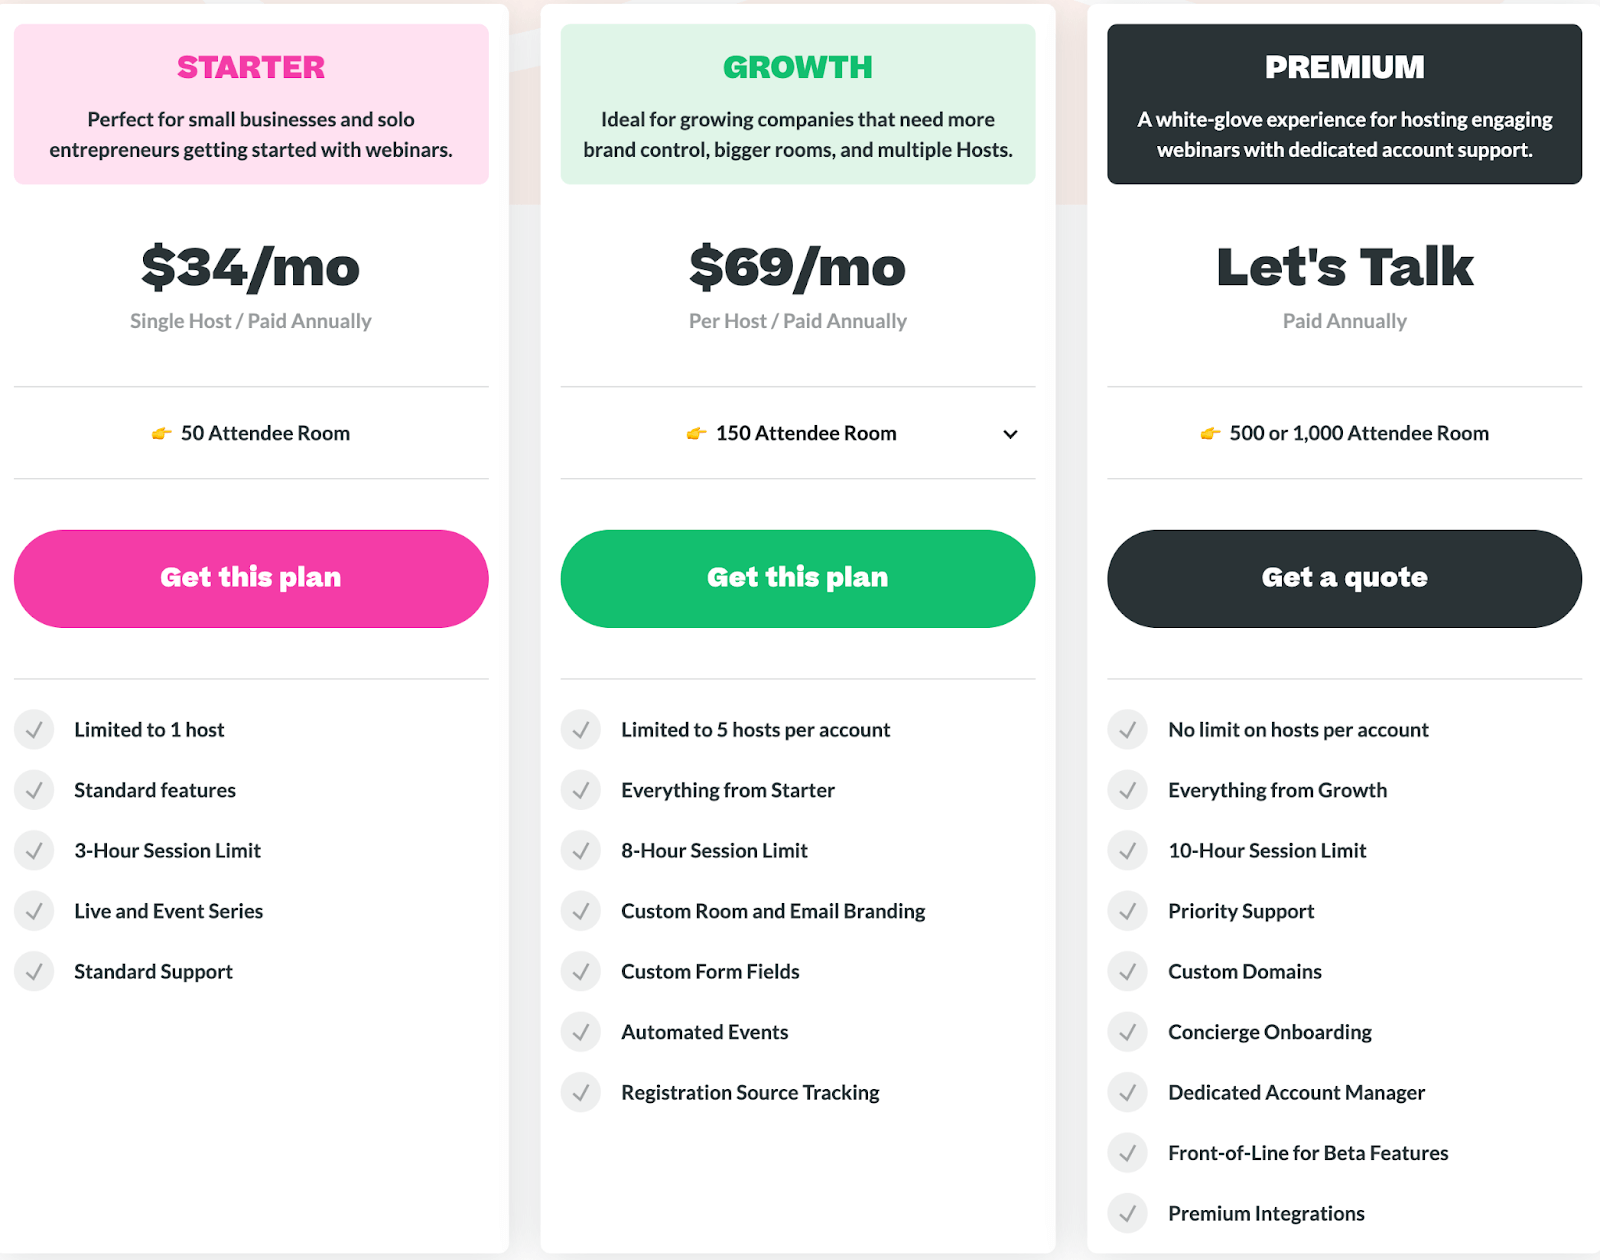 Pricing for hosting meetings on Demio.